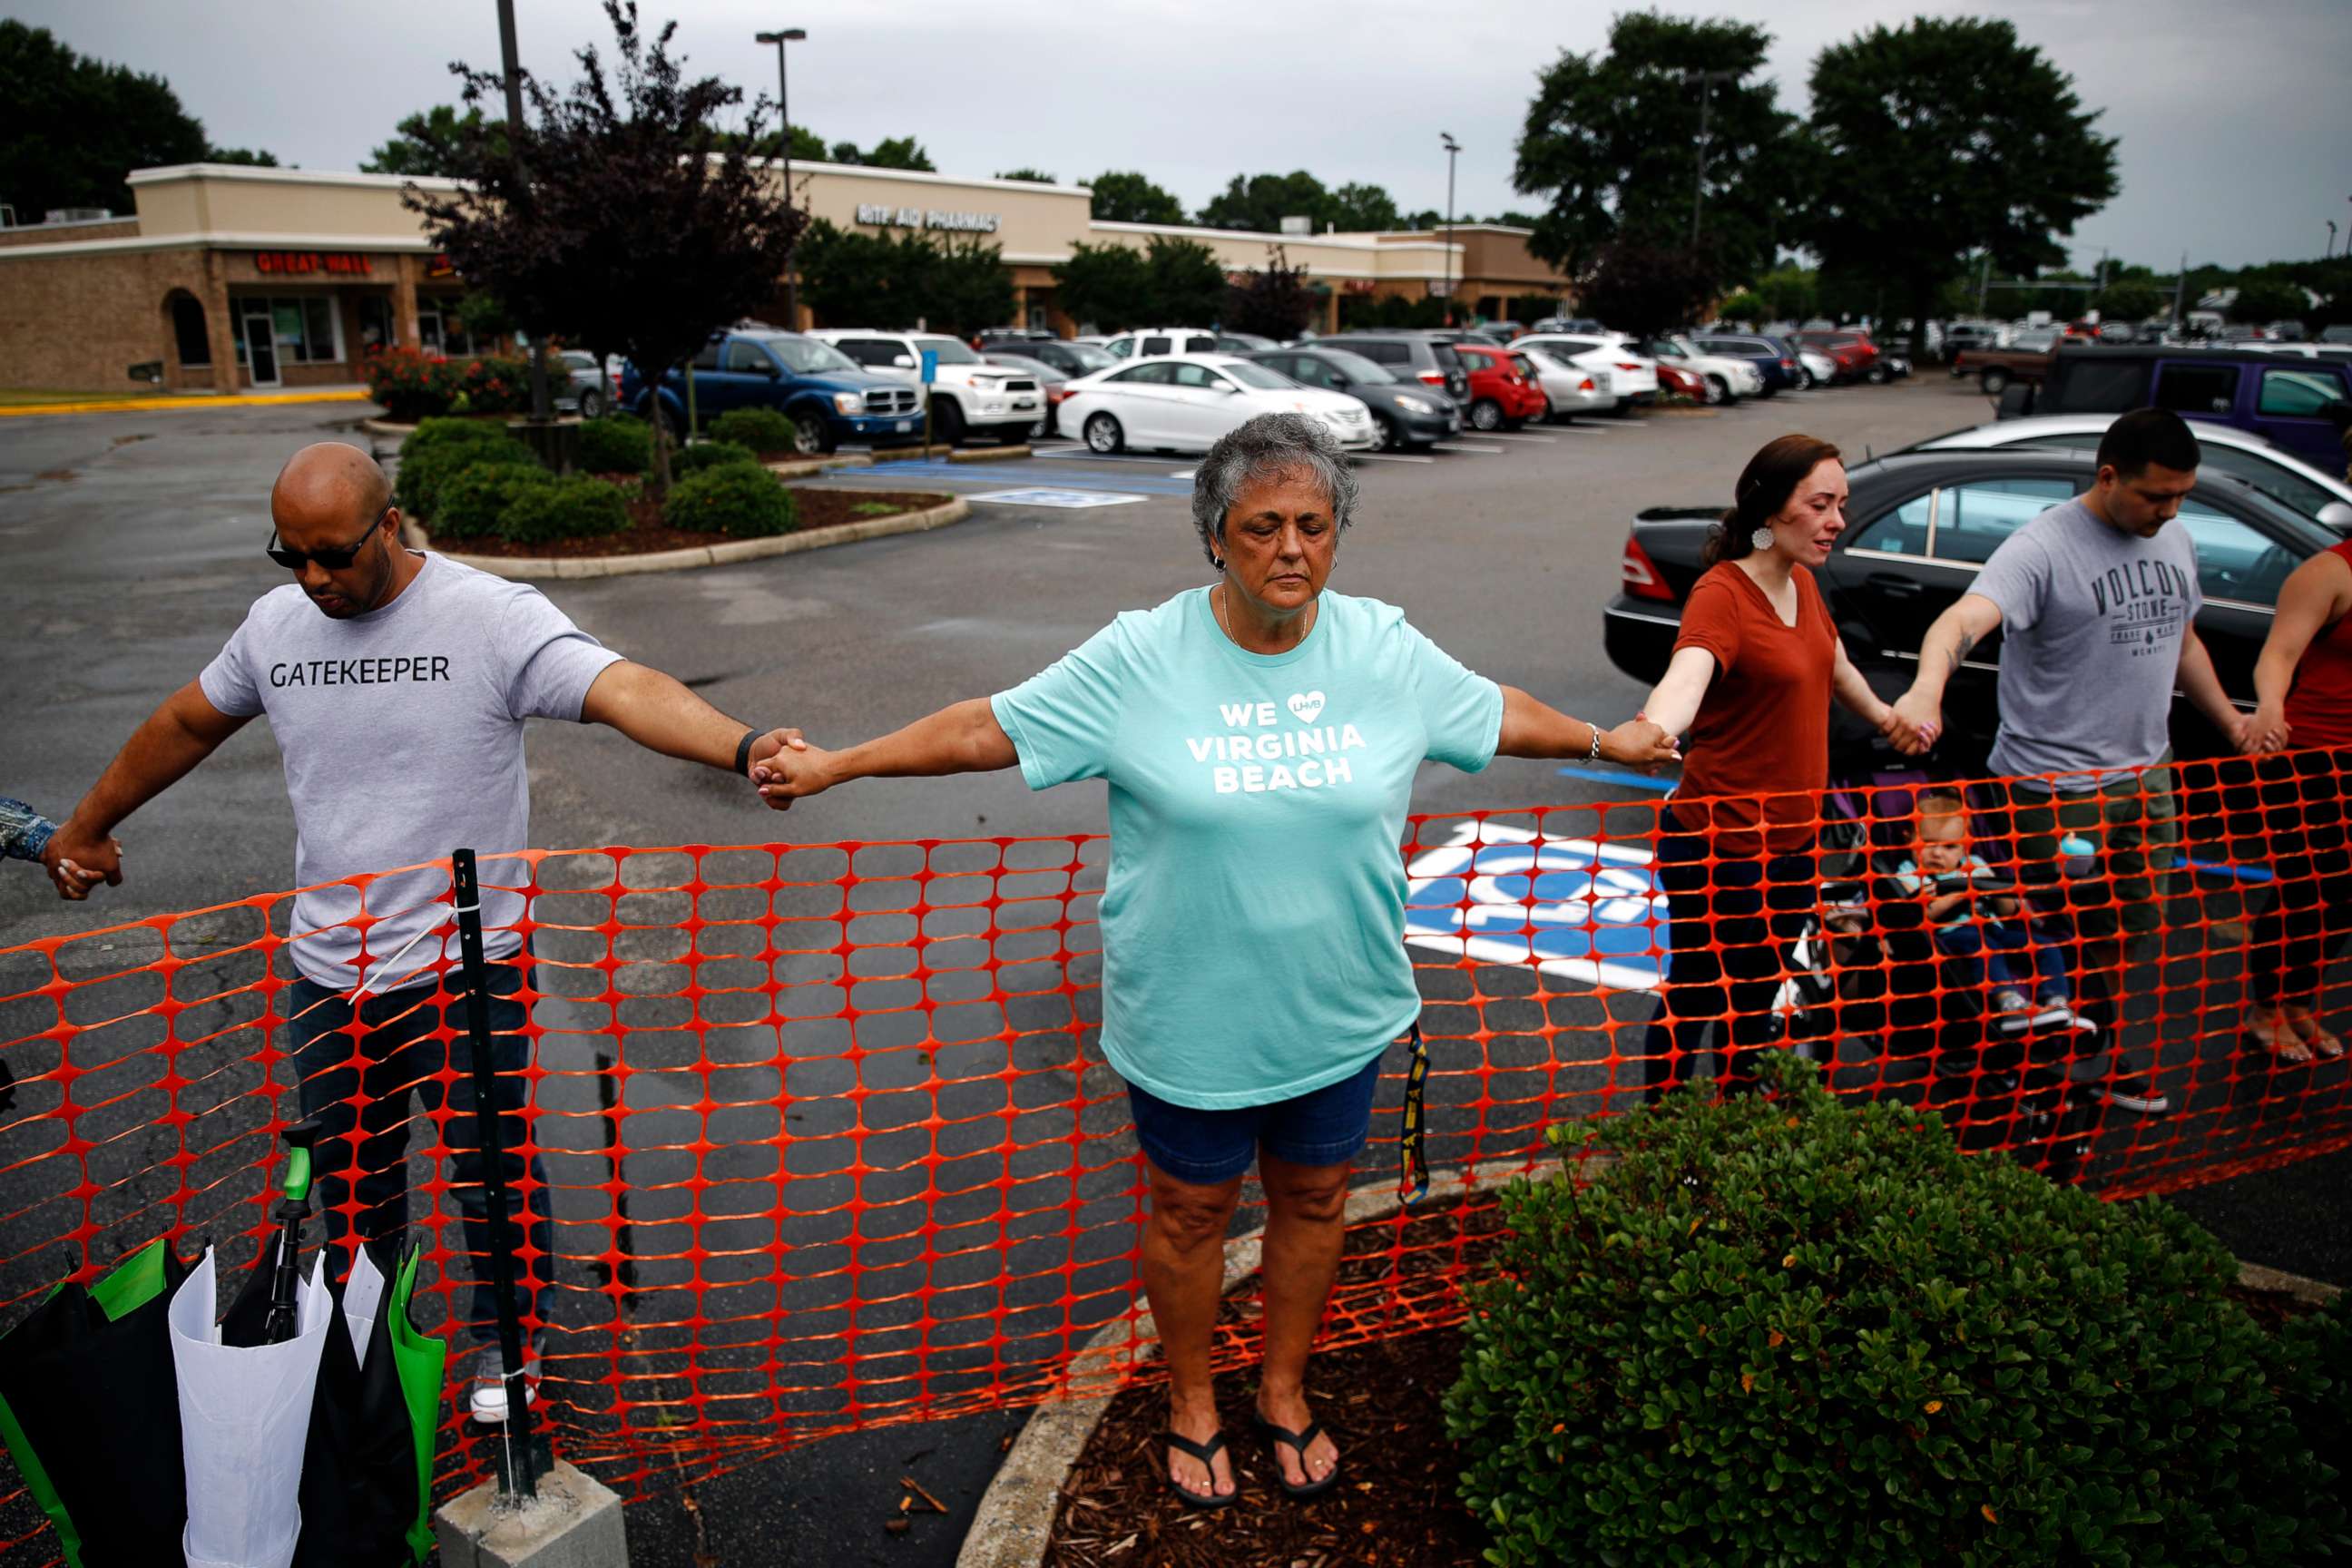 PHOTO: Lisa Dunaway, center, of Virginia Beach, Va., holds hands with gatherers during a vigil in response to a shooting at a municipal building in Virginia Beach, Va., June 1, 2019.